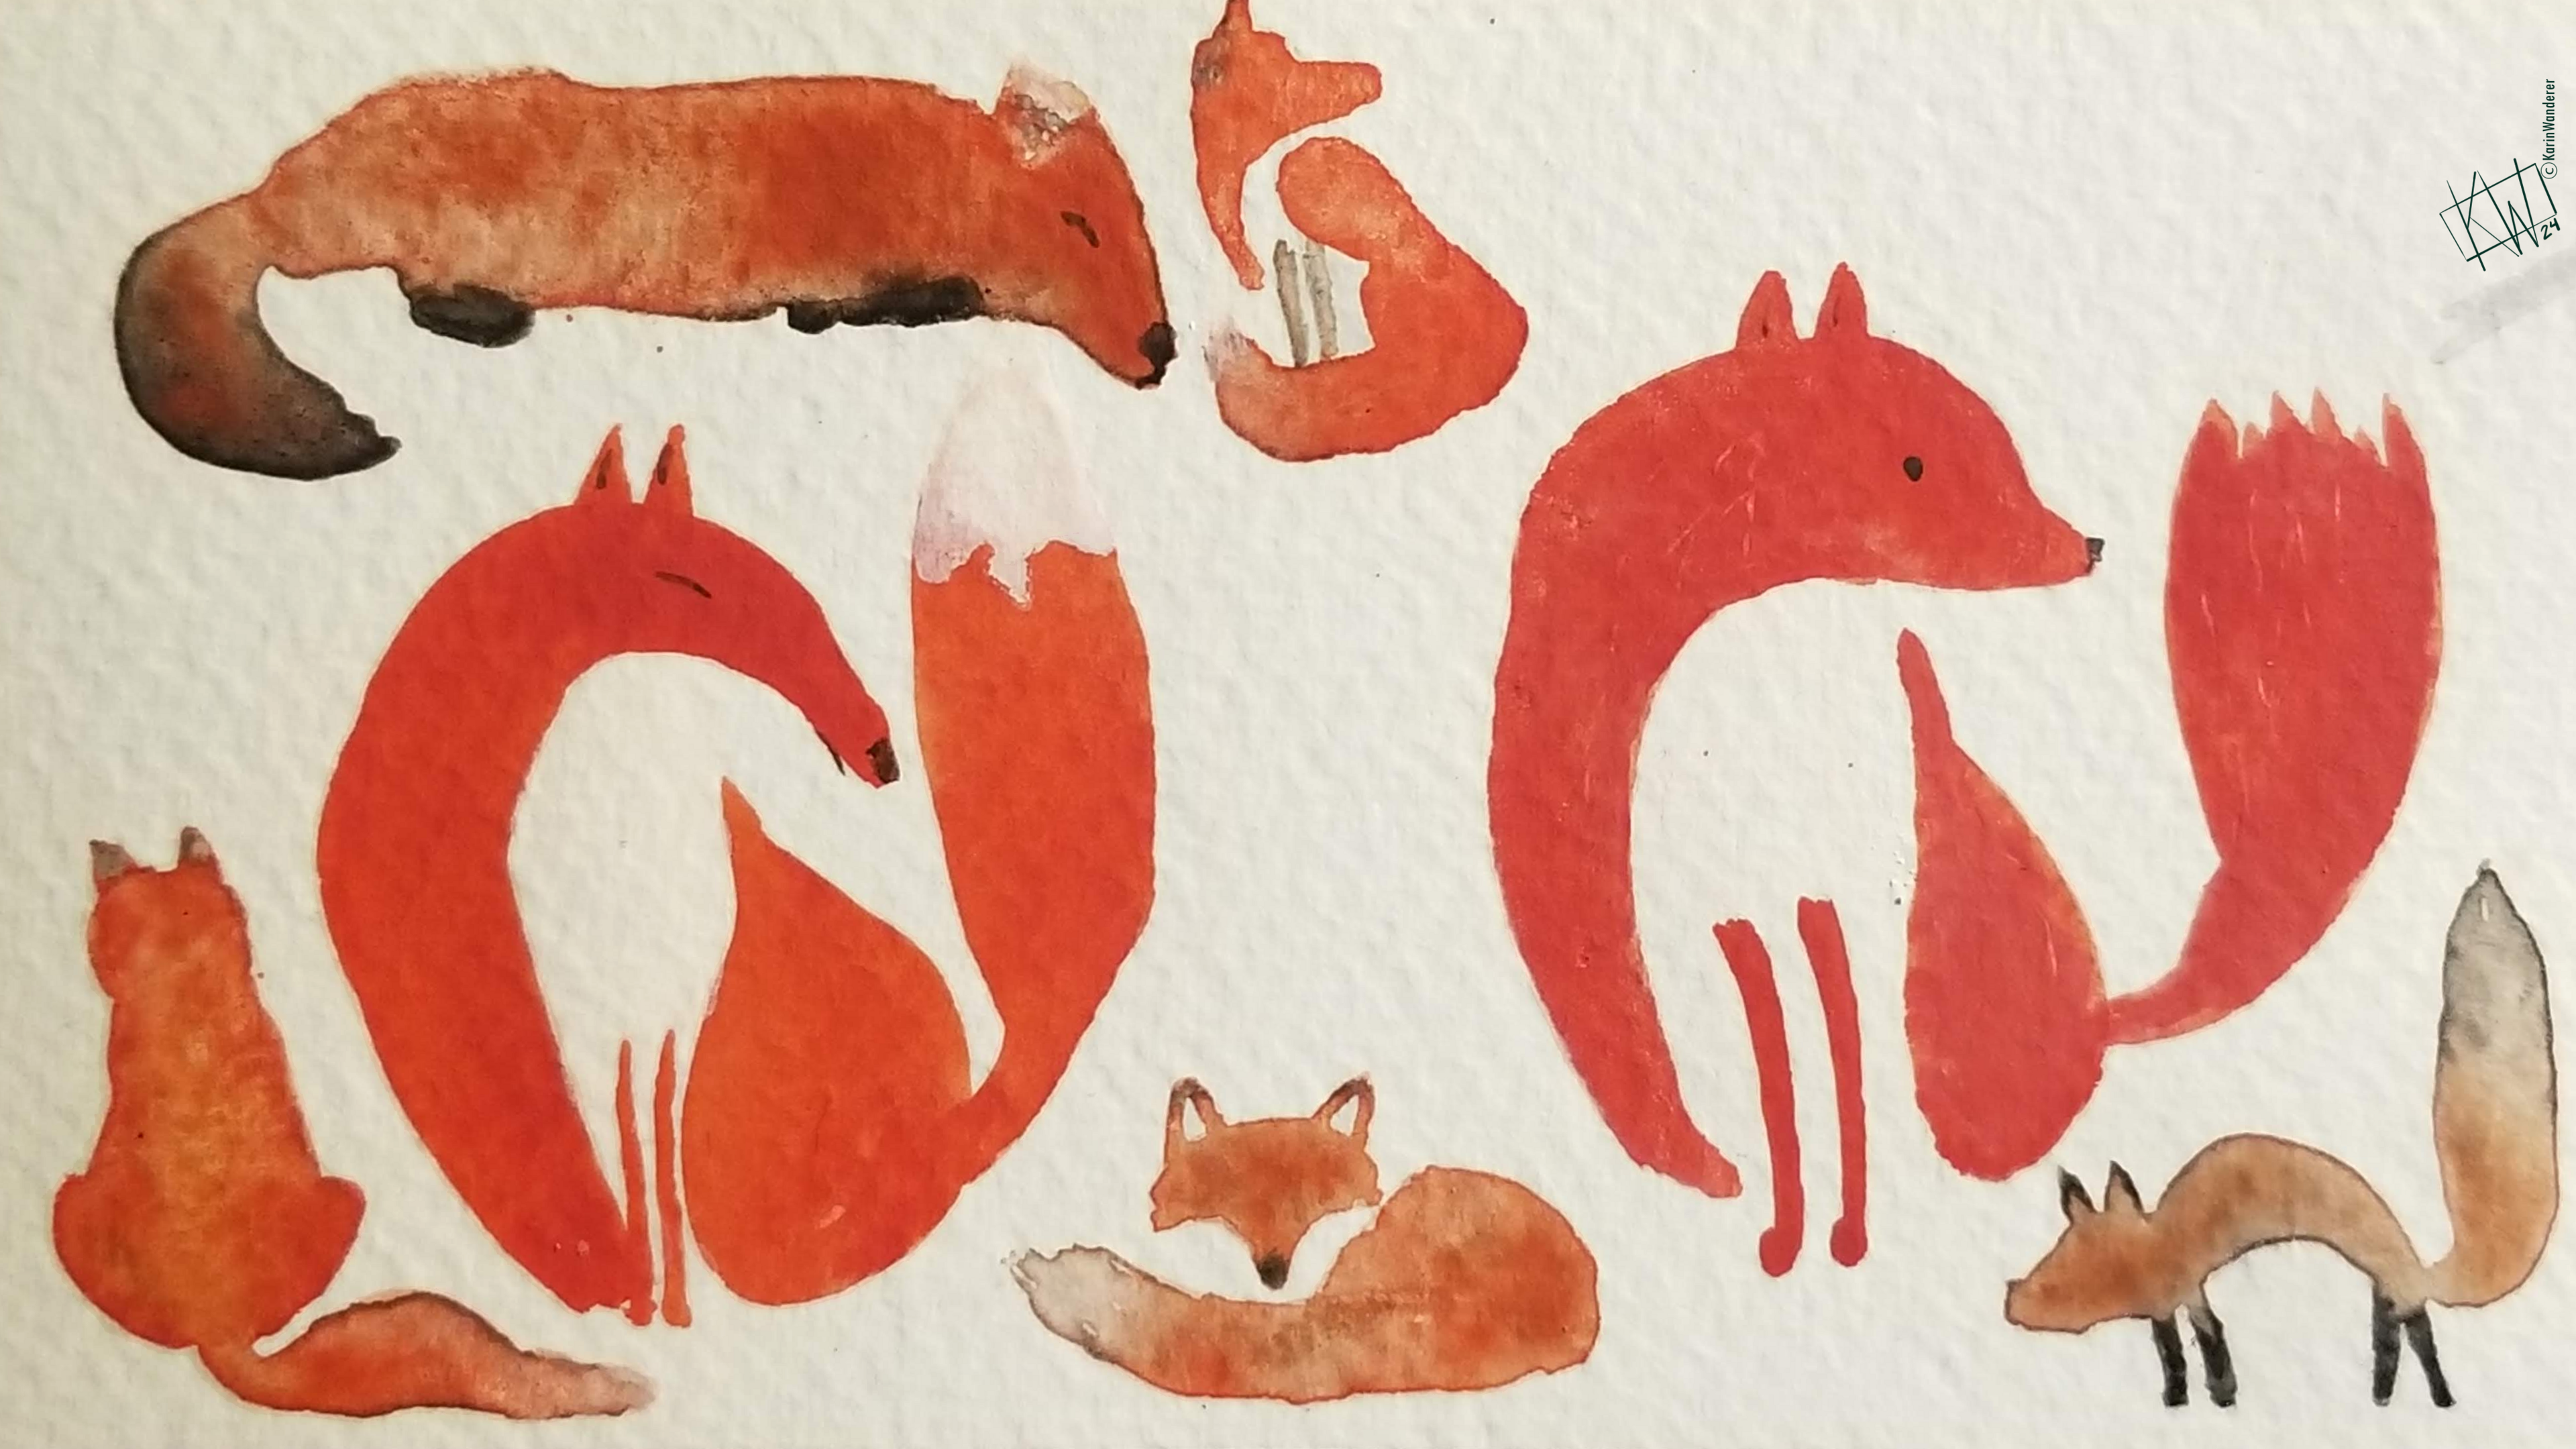 Watercolor foxes sitting, sleeping, & jumping. One of these foxes is a cat in disguise.